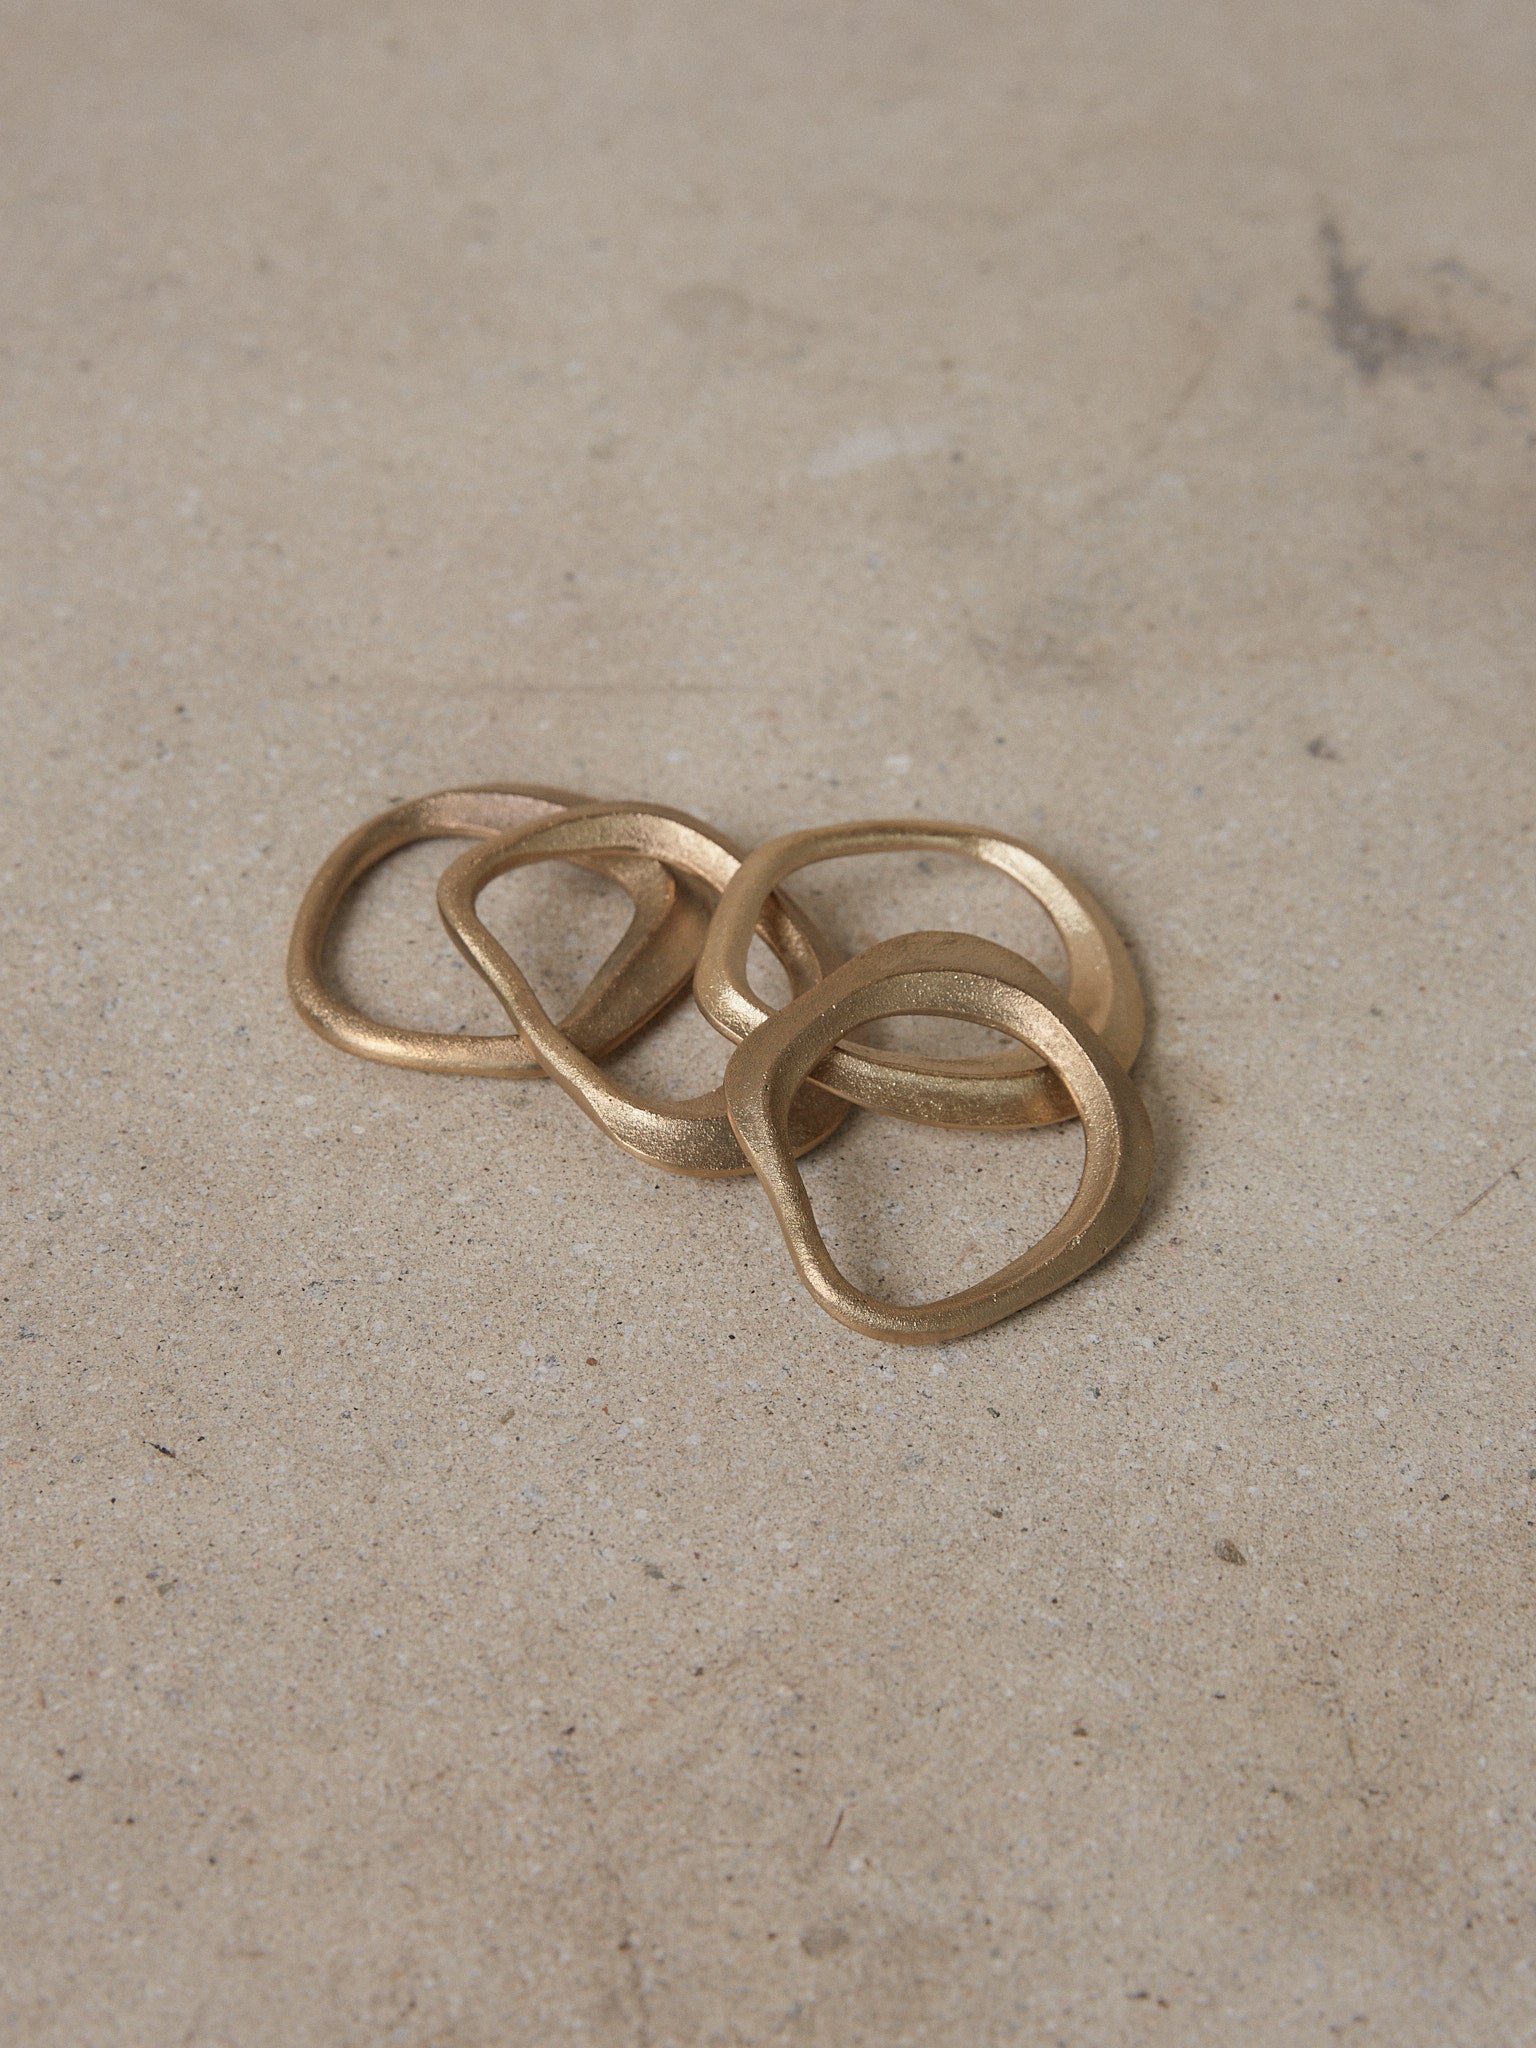 Flow Napkin Ring Set. Set of four solid cast brass napkin rings inspired by nature in flowing, organic shapes. 